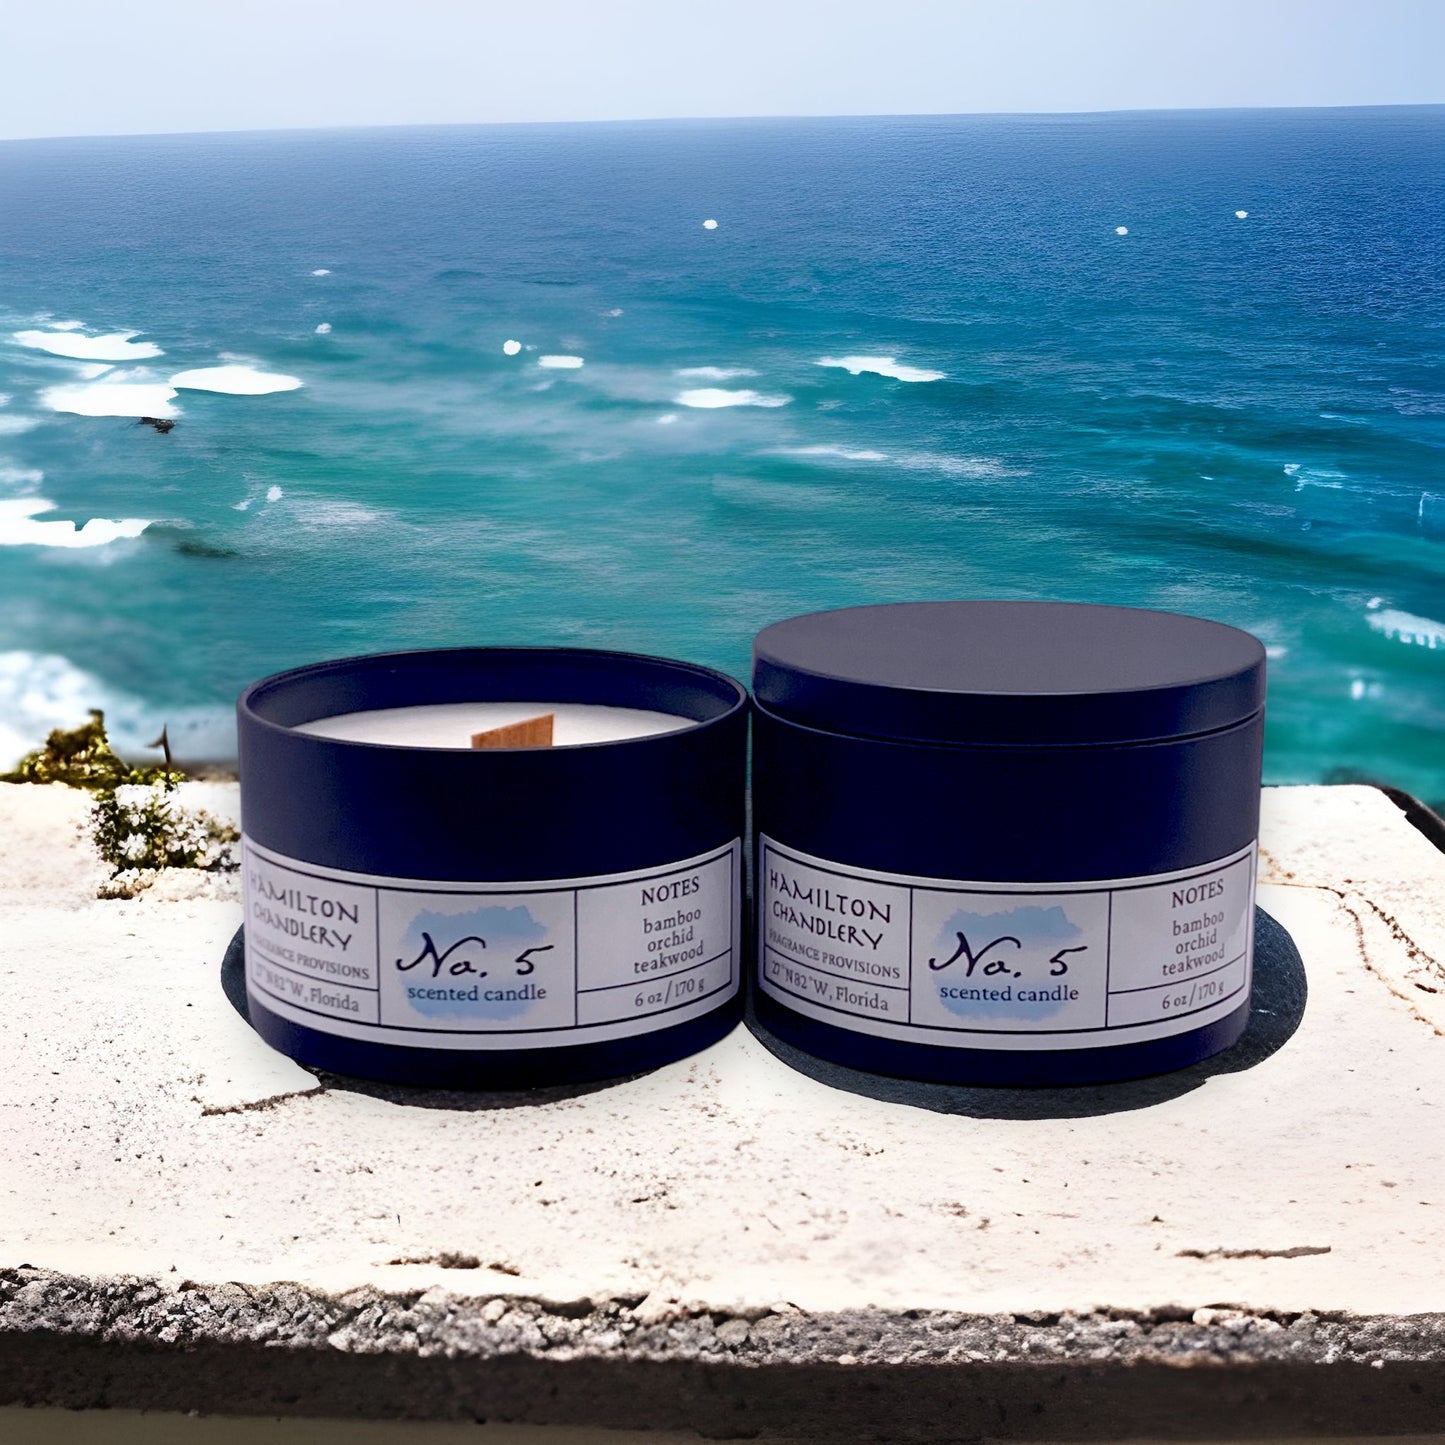 Fragrance No. 5 Travel Tin Candles on Concrete Slate with Ocean in Background | Hamilton Chandlery